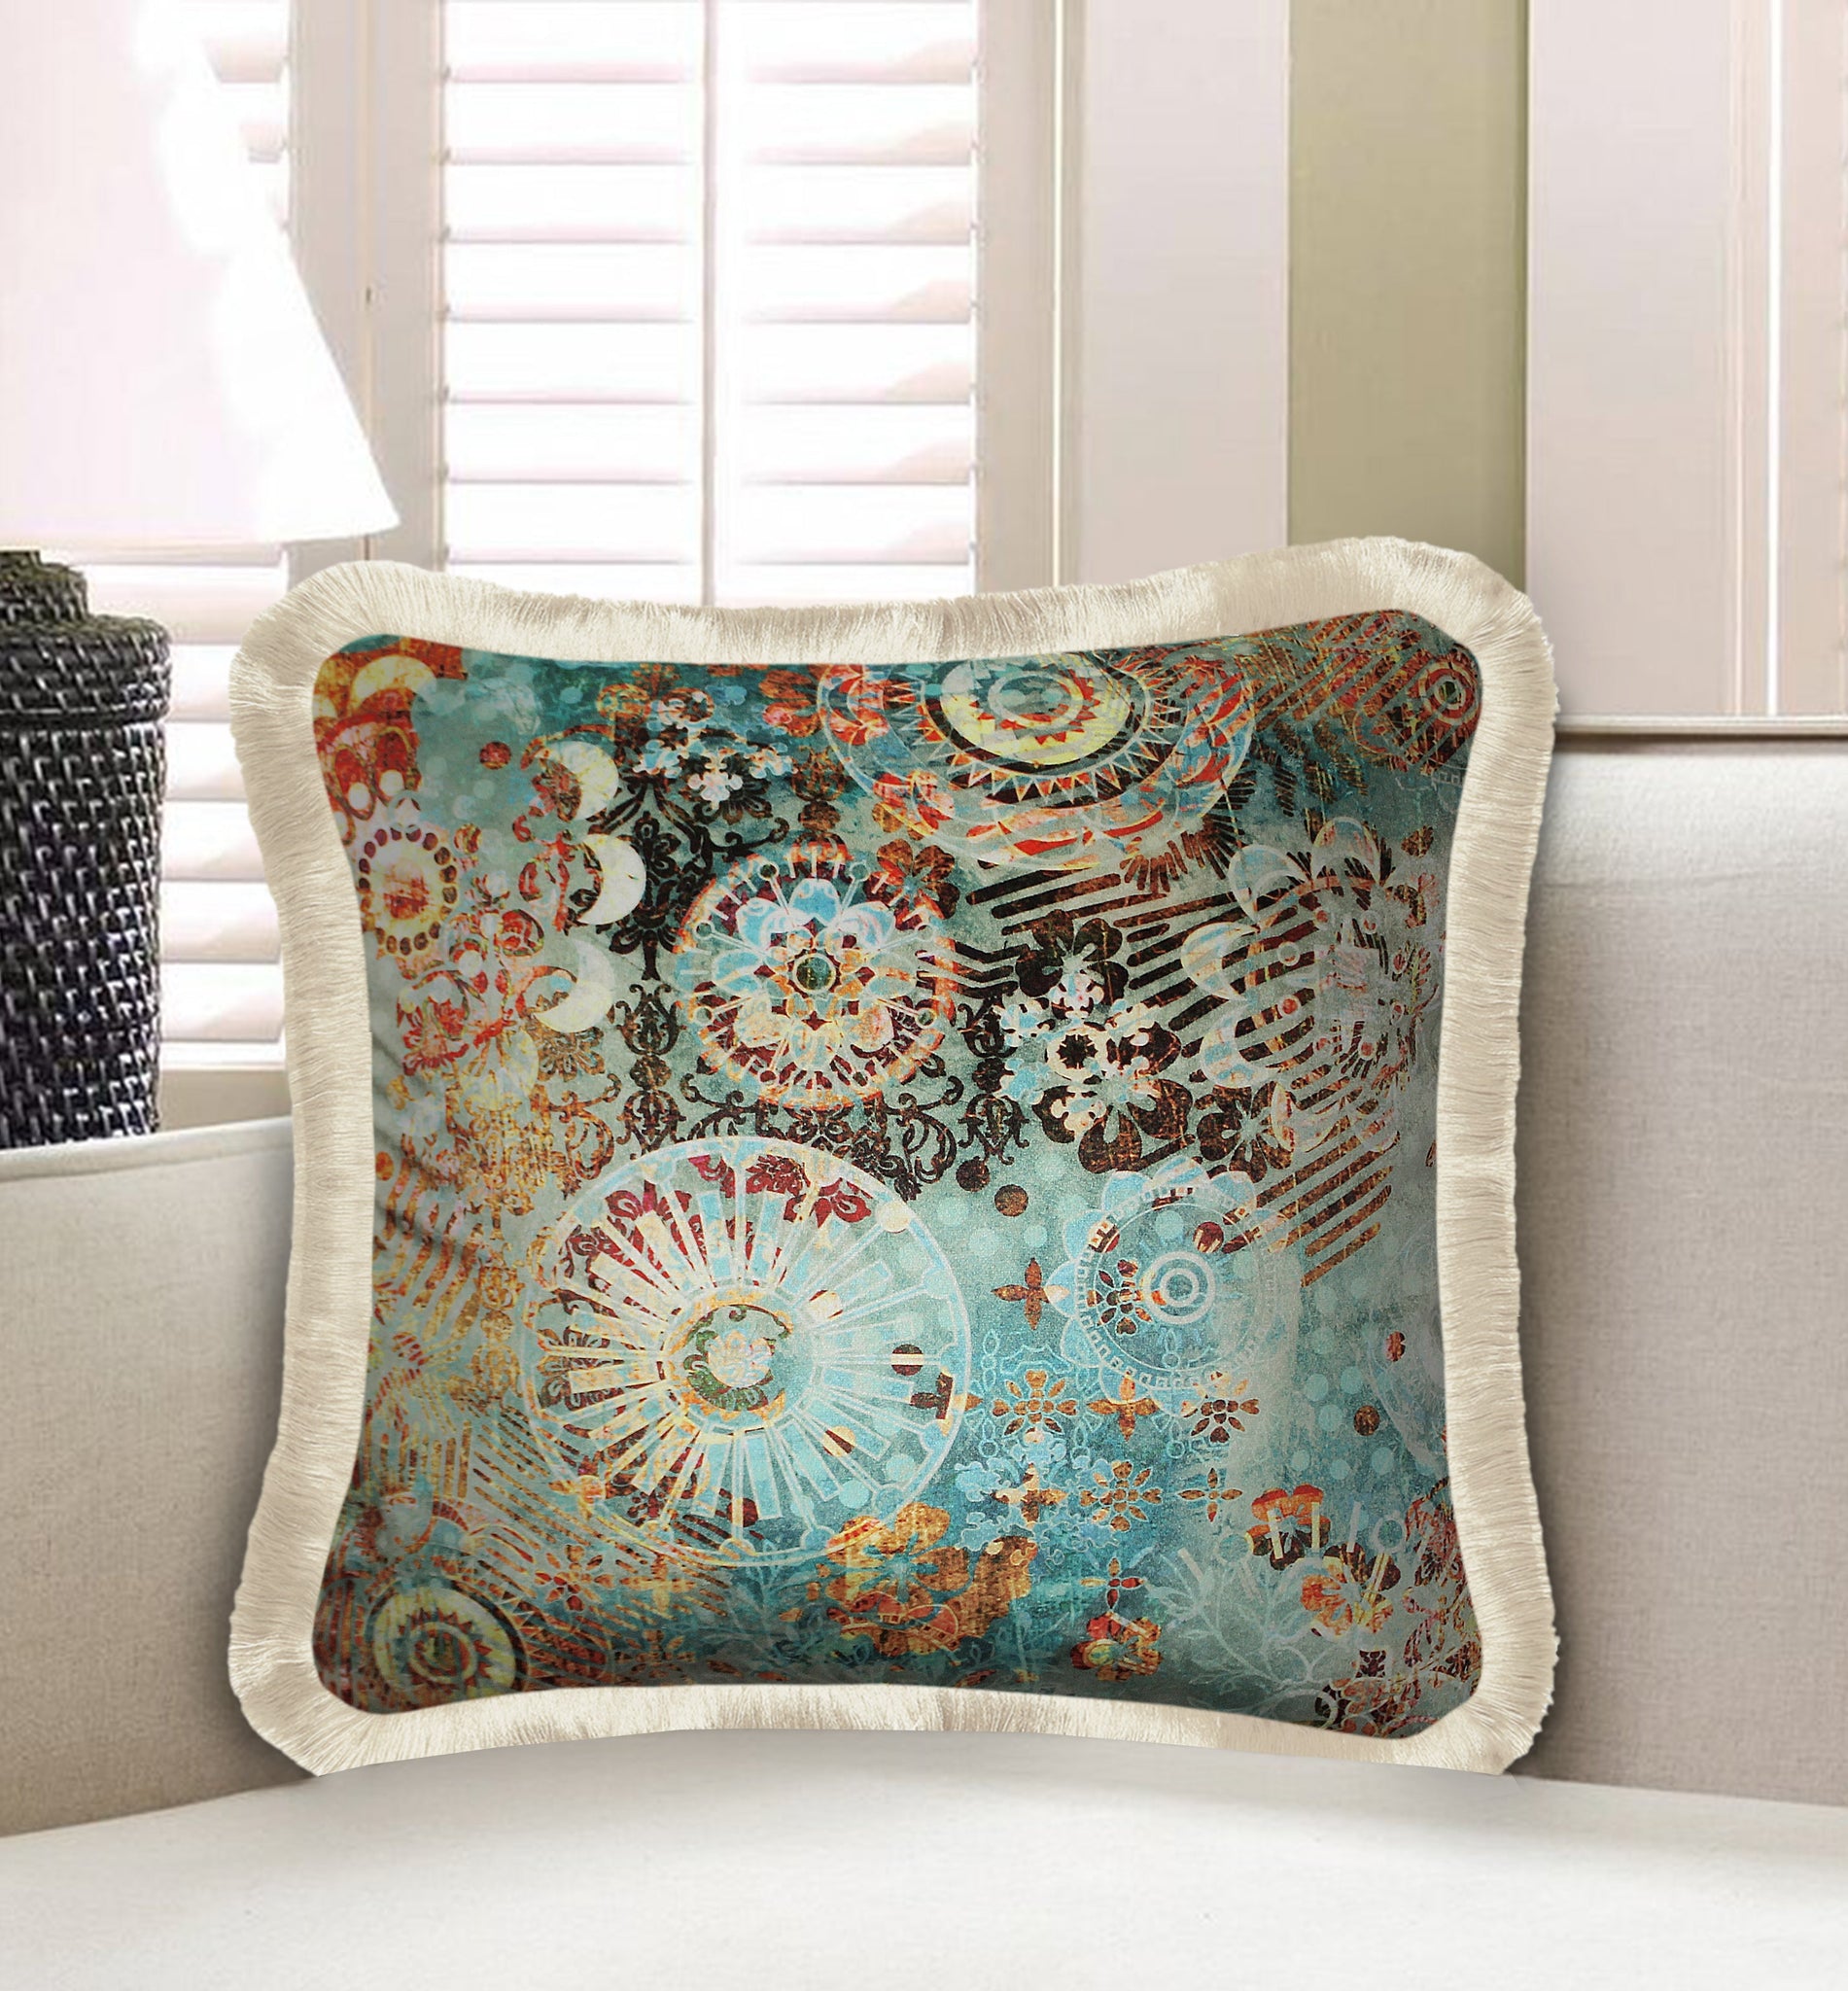 Velvet Cushion Cover Colorful Abstract Floral Art Decorative pillowcase Home Decor Flower Paint Décor Throw Pillow for Sofa Chair Bedroom Living Room Multi Color 45x45cm (18x18 Inches)